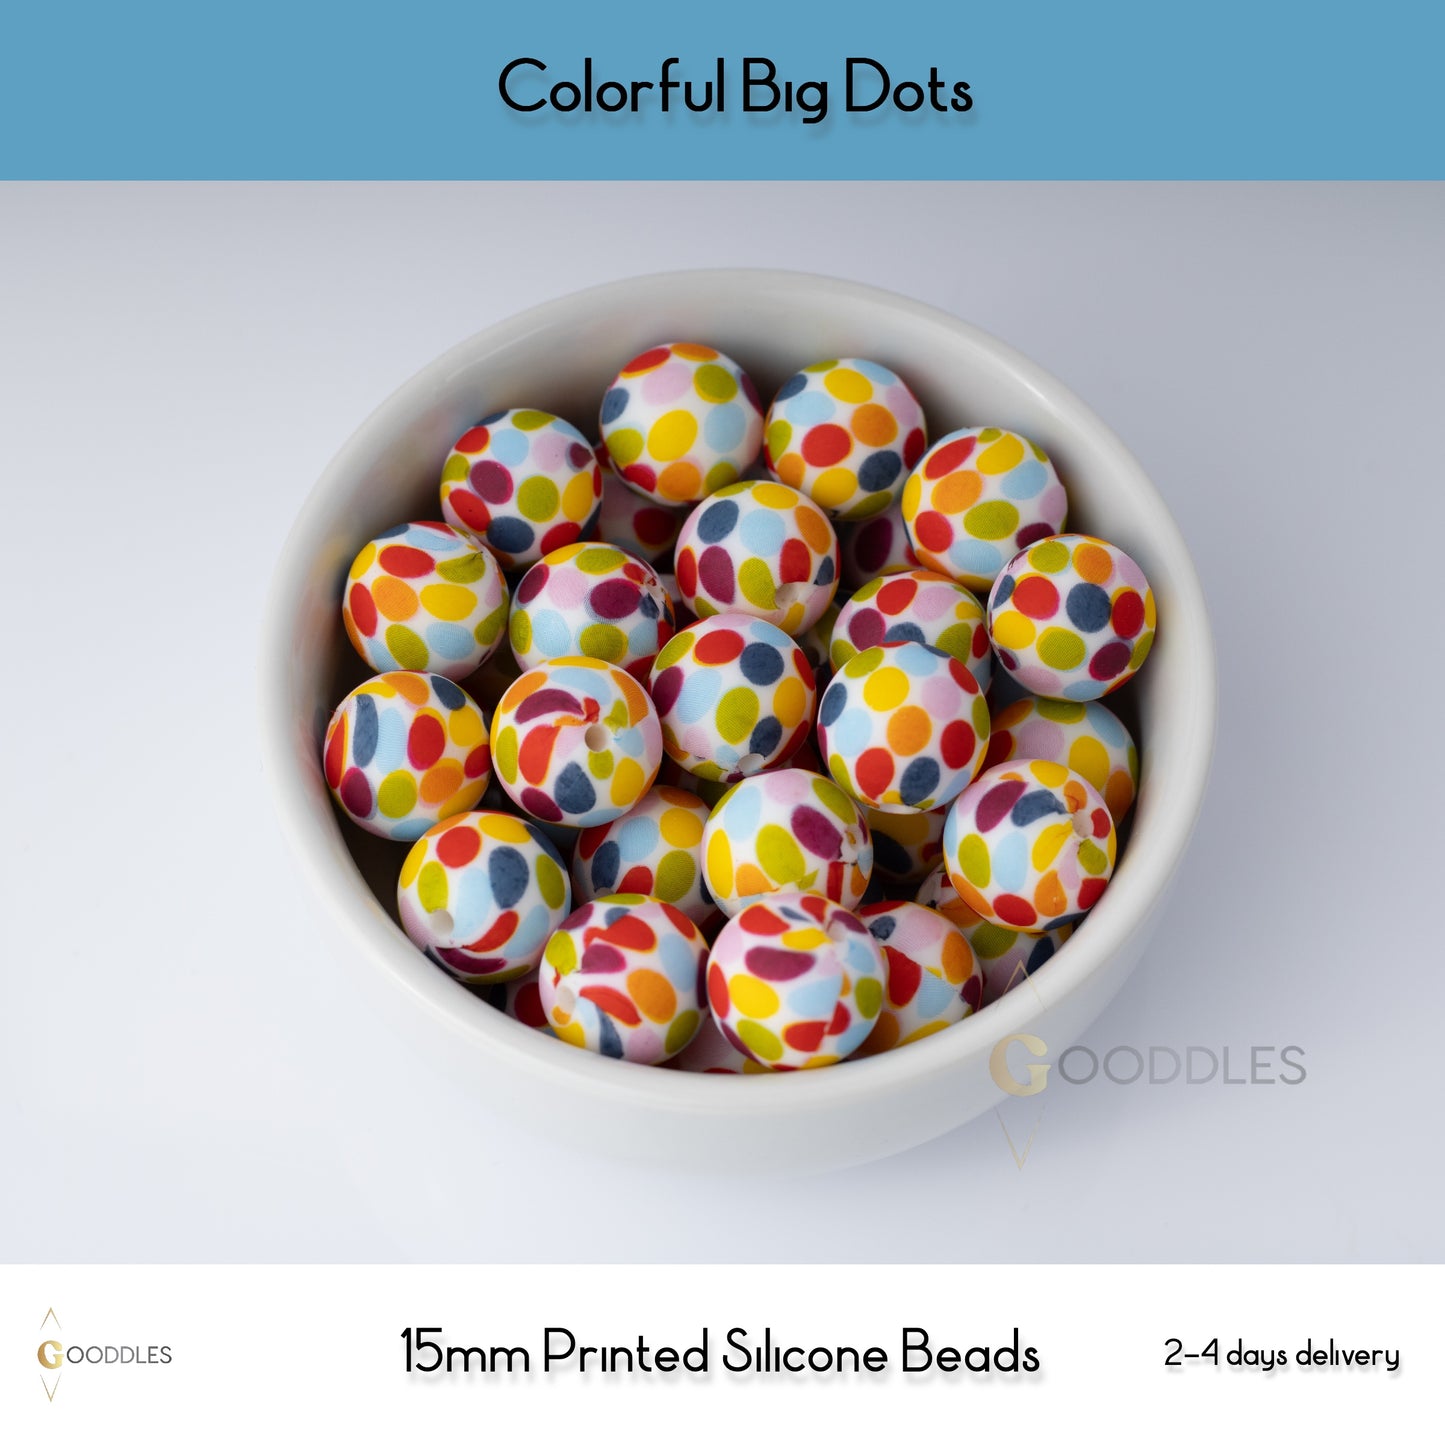 5pcs, Colorful Big Dots Silicone Beads Printed Round Silicone Beads